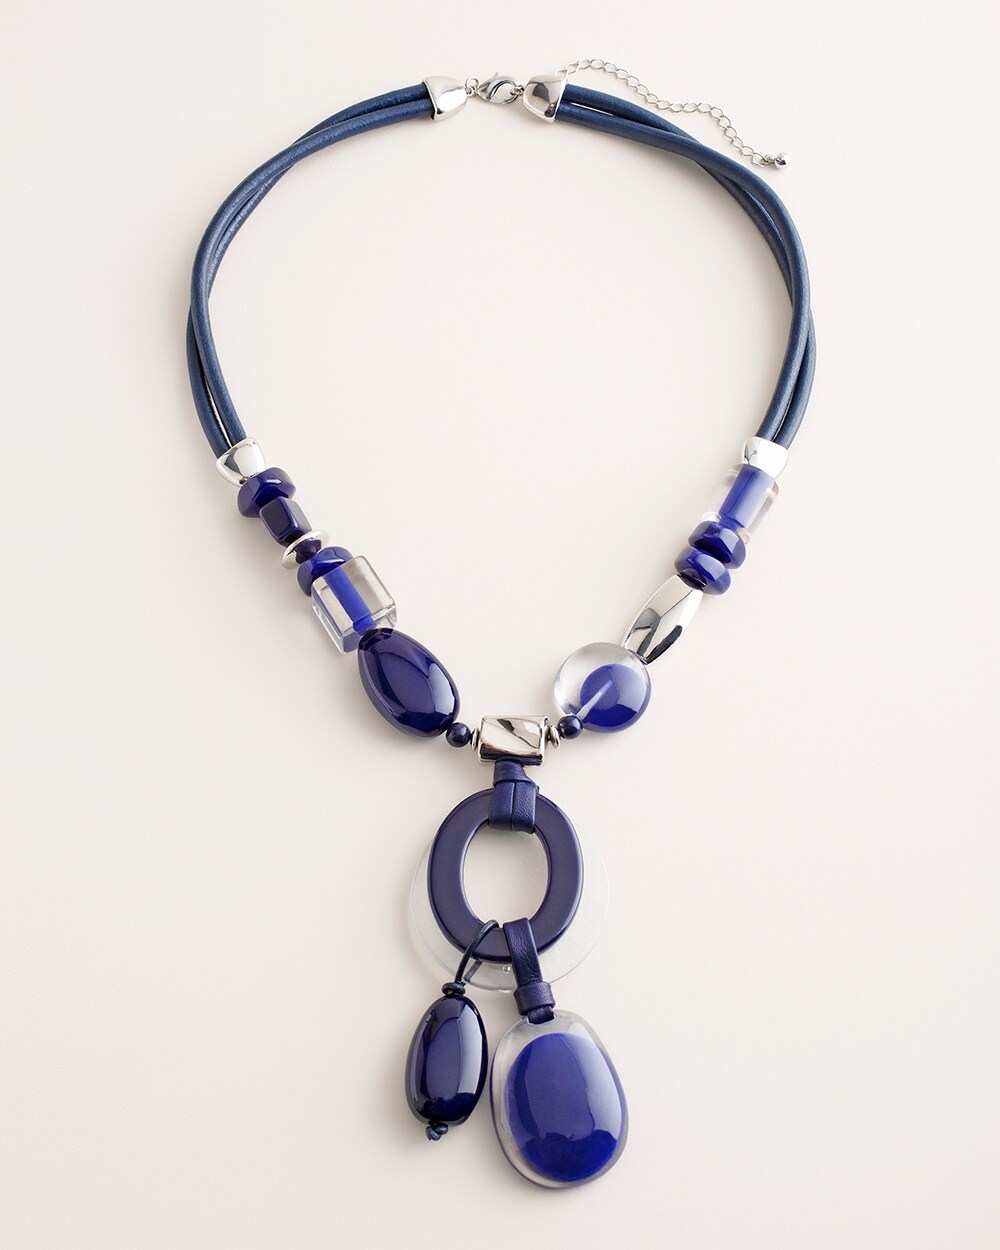 Long Navy and Silvertone Pendant Necklace